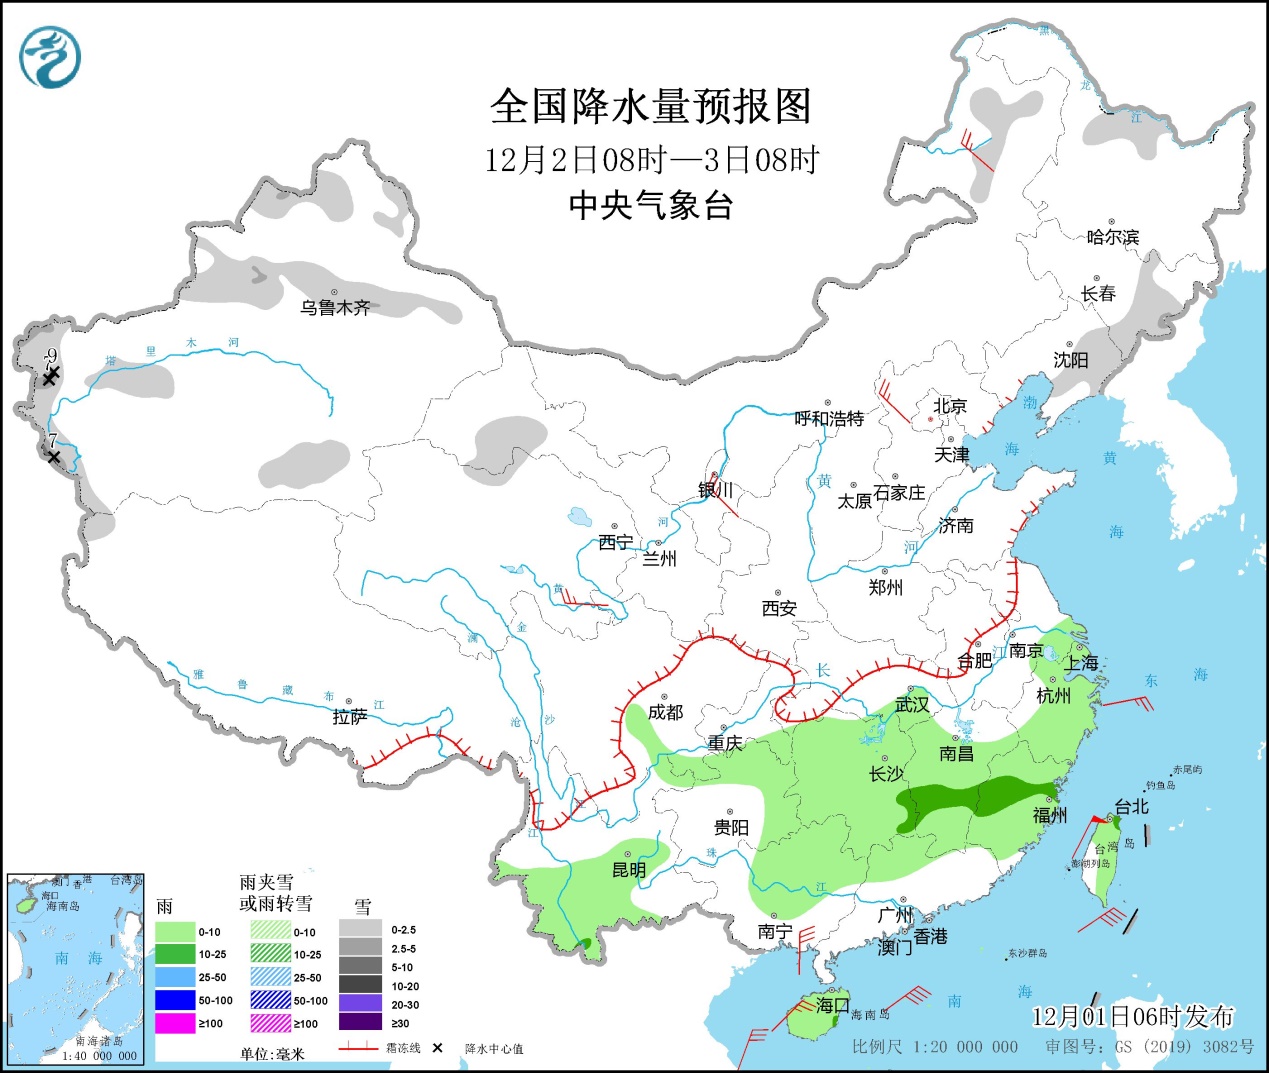 The temperature in the southern region is low, and there are rainy and snowy weather in the western and northern parts of the south of the Yangtze River